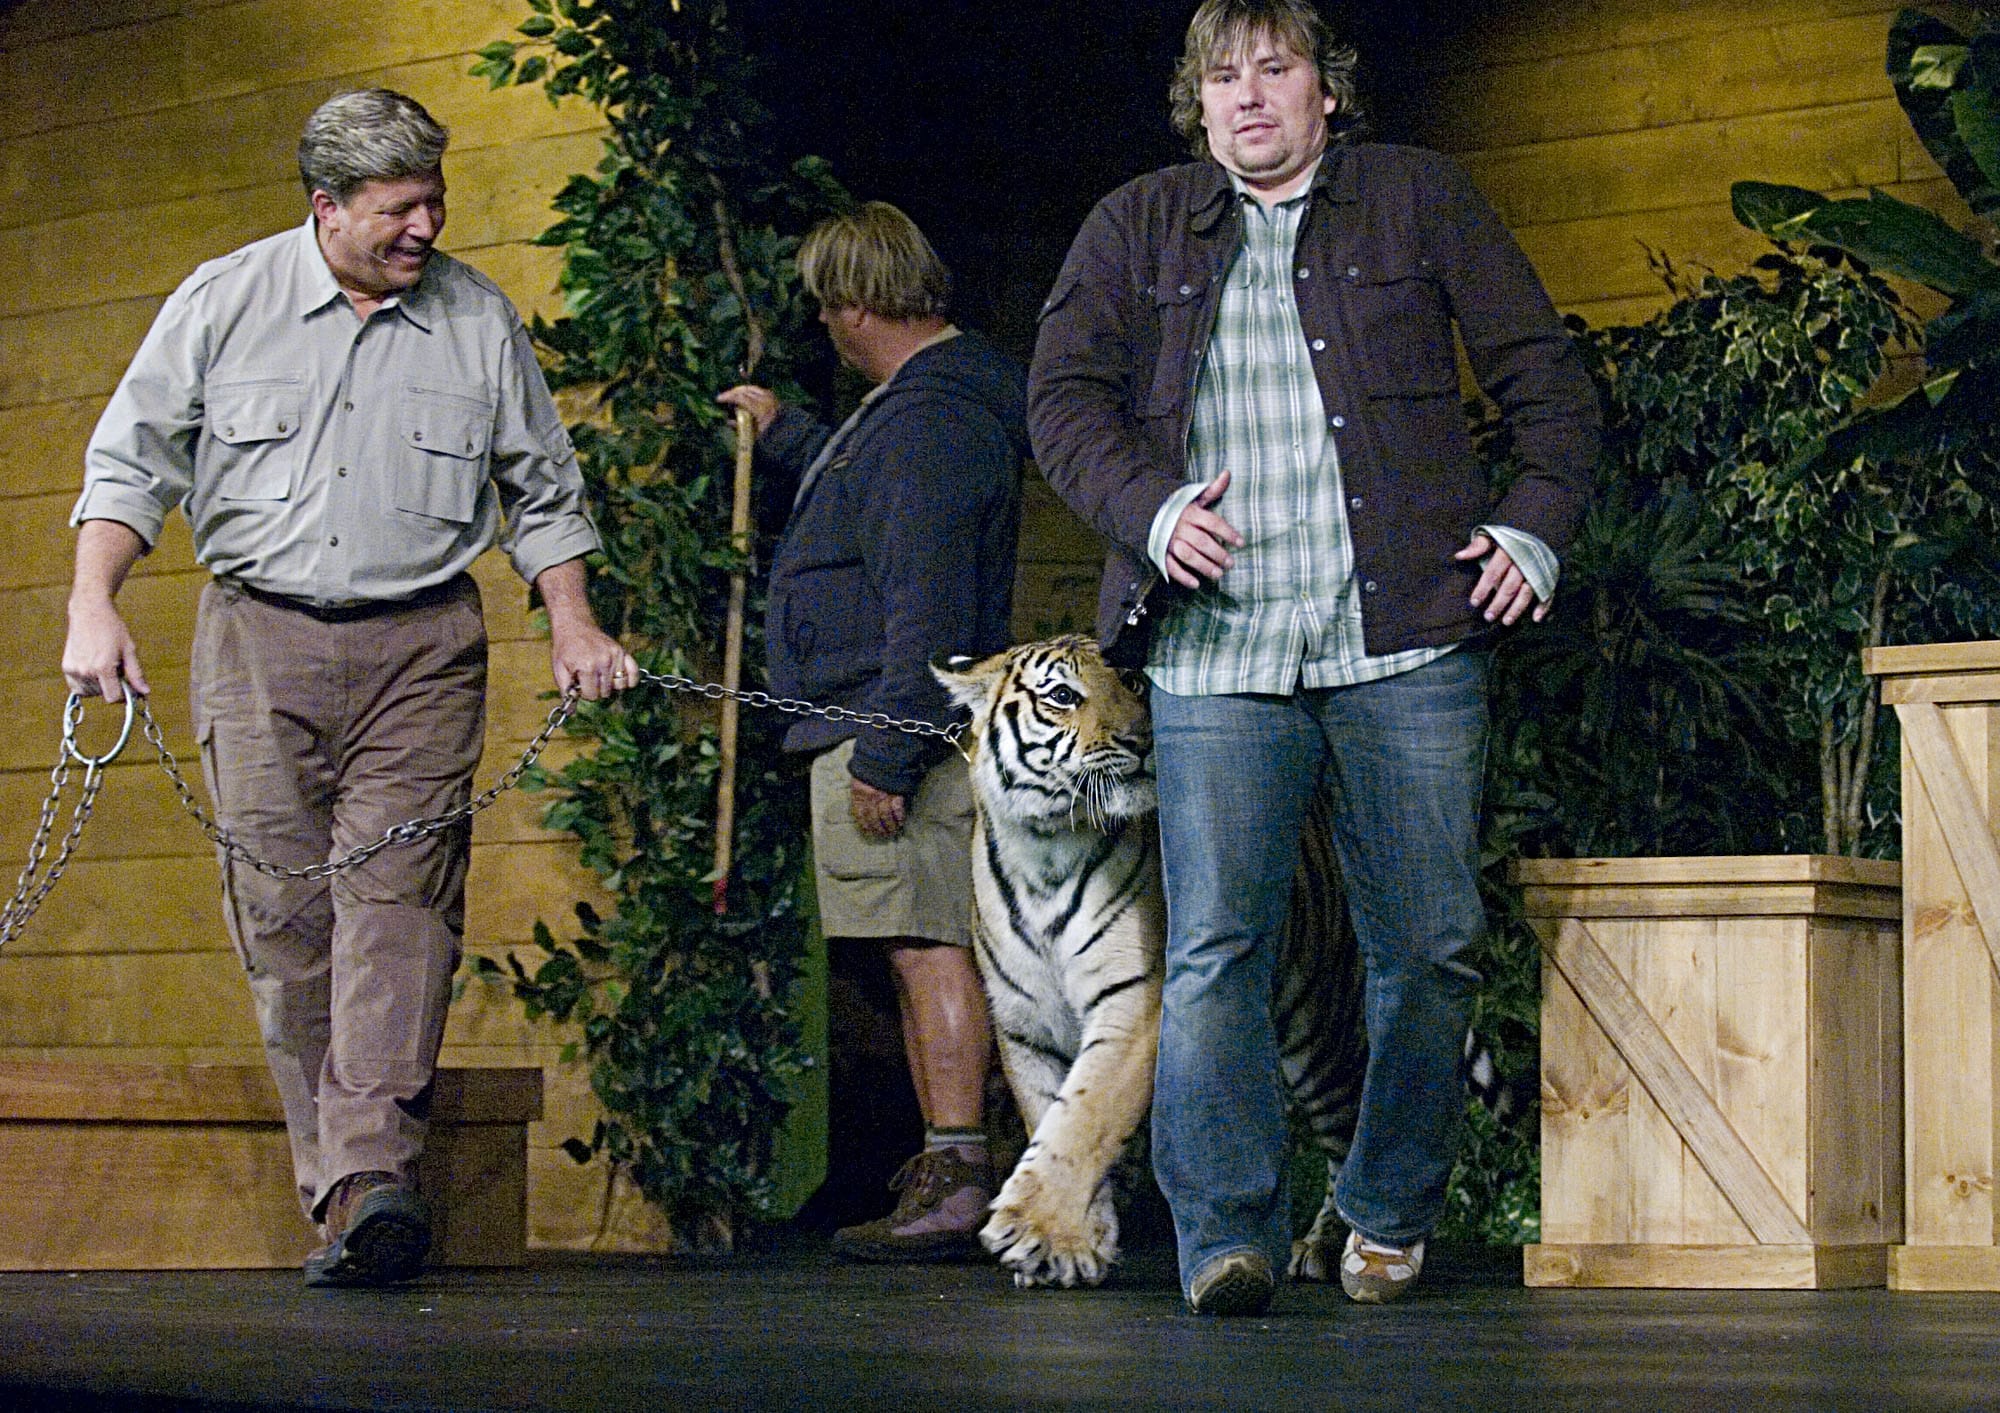 Living Hope Church pastor John Bishop got up close and personal with a tiger named Sundar at a service in 2007,  during the last of the ARK series, "Risk of Moving." From left are Dan Stockdale of Harriman, Tenn., left, and Rick Kelly of San Bernadino, Calif., owner of Amazing Animal Productions.